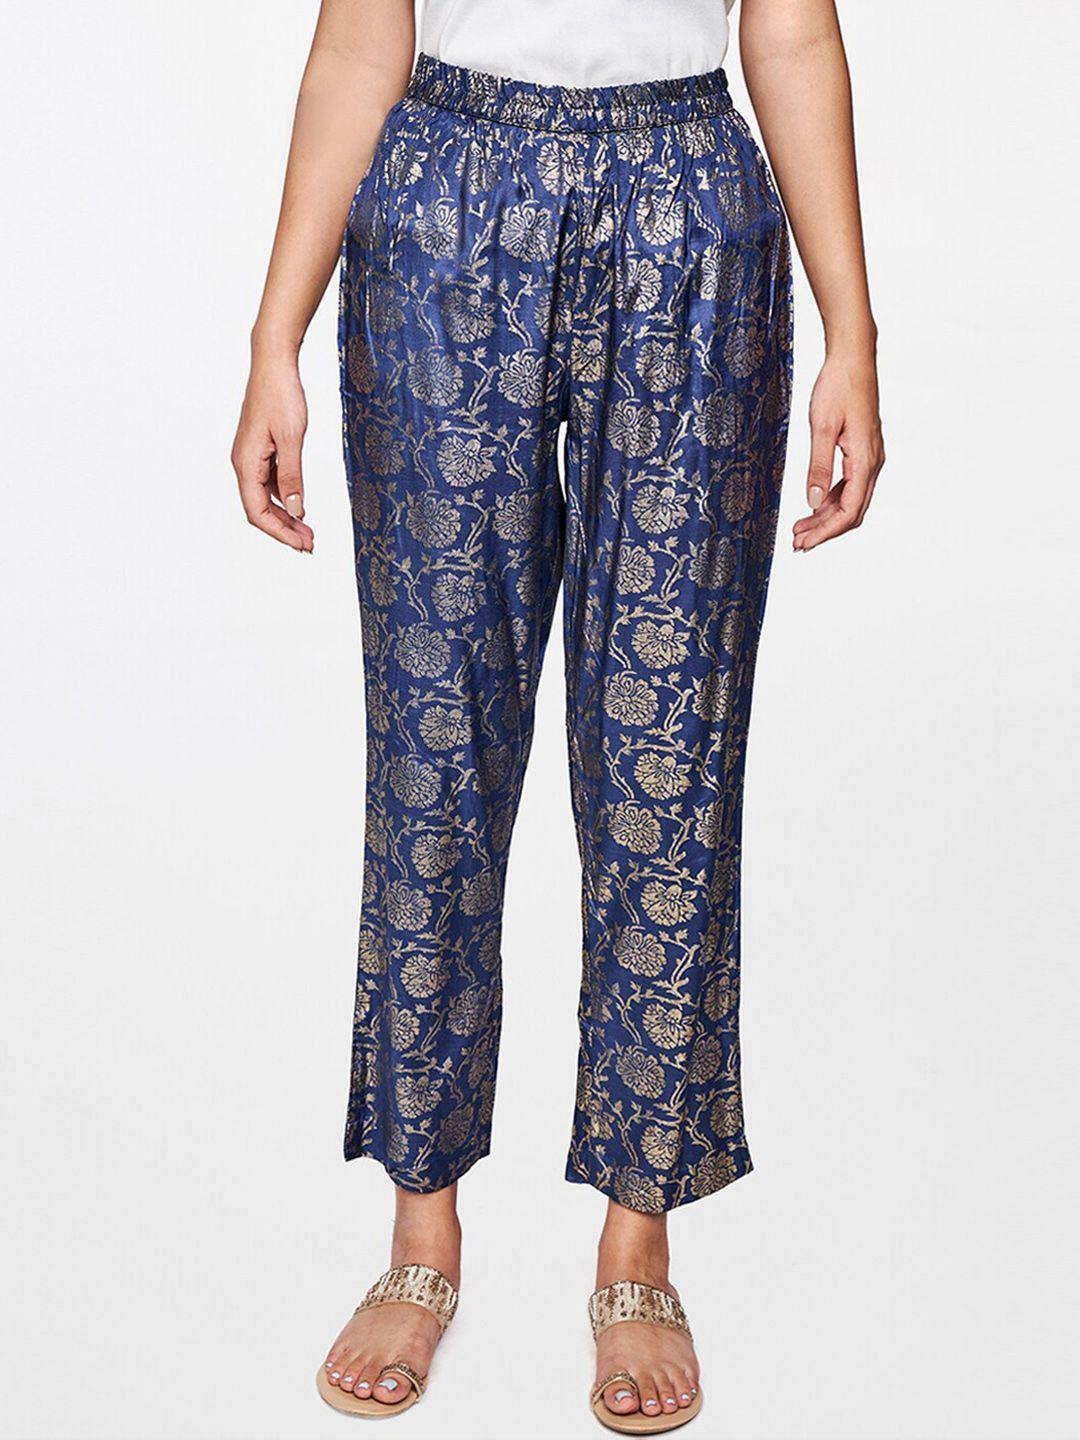 itse women blue floral printed comfort loose fit trousers